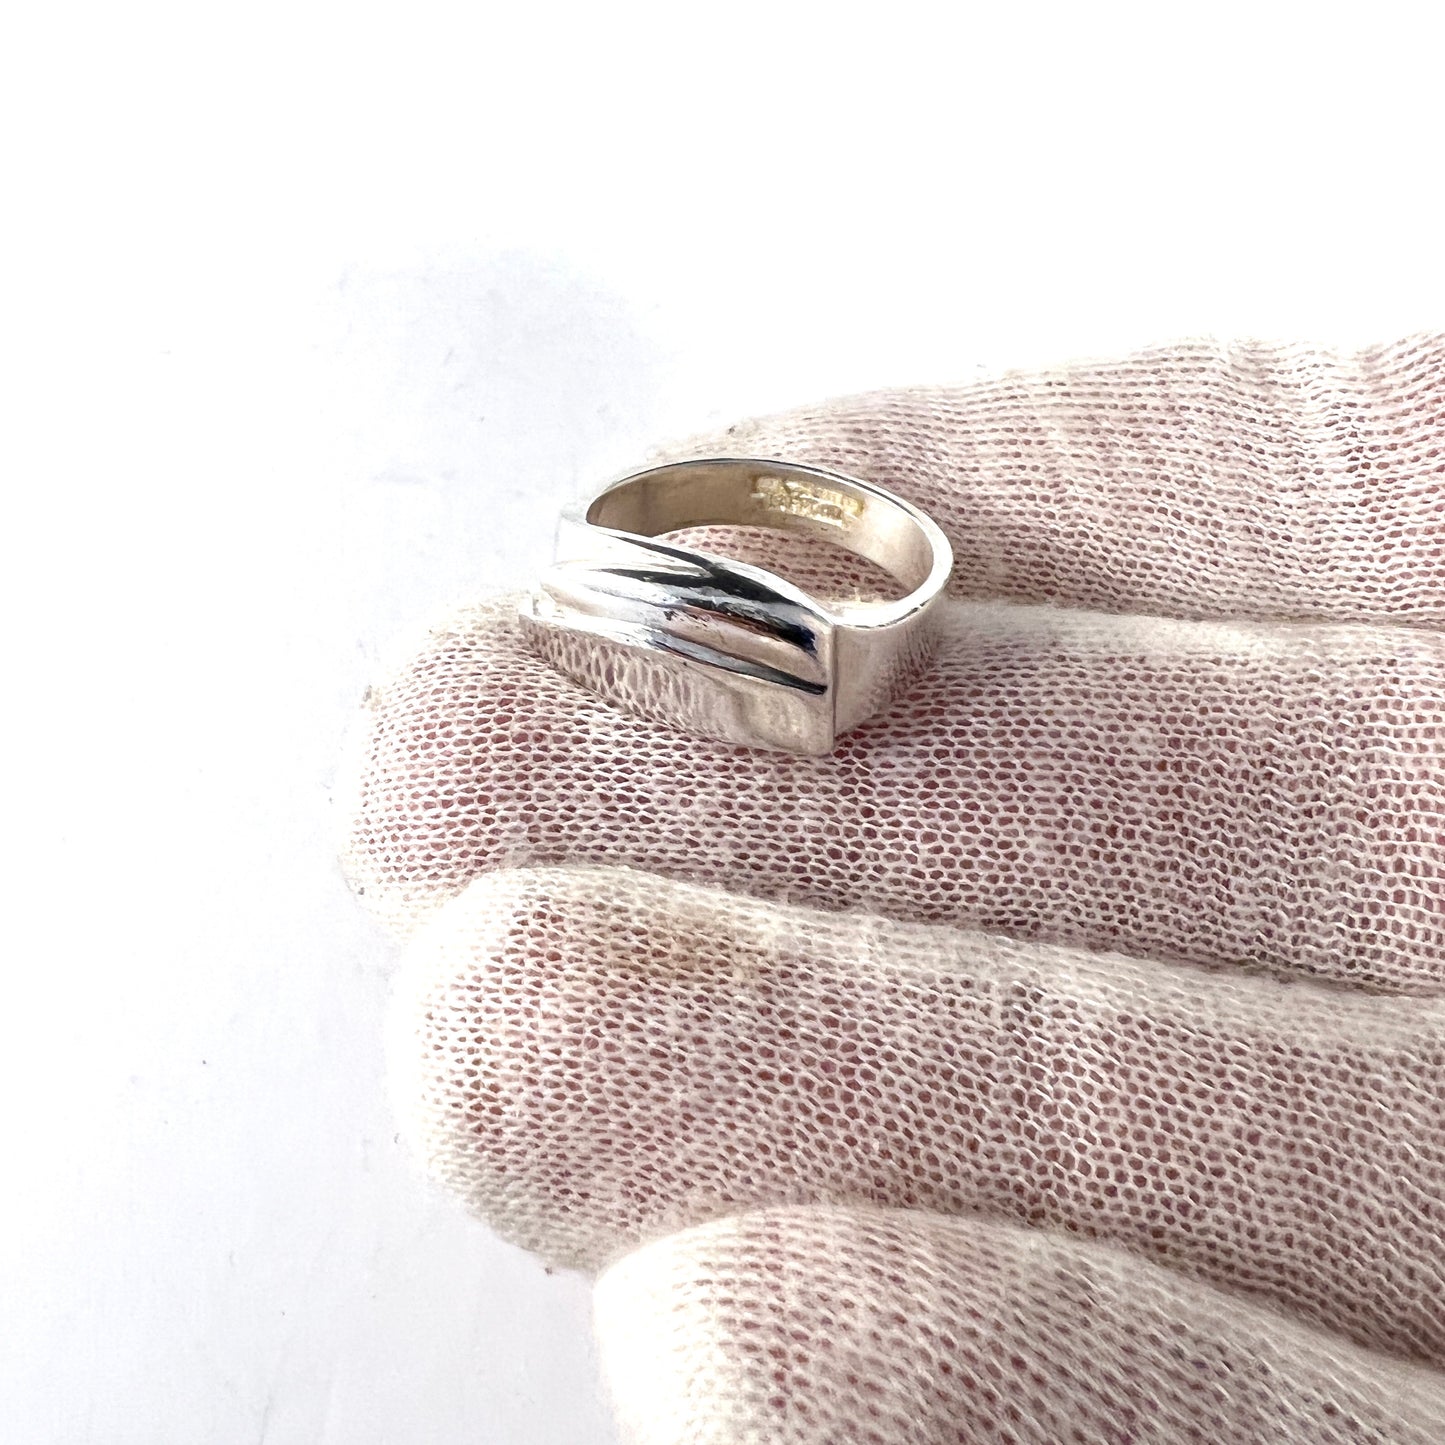 Lapponia, Finland 1986. Vintage Sterling Silver Unisex Ring.